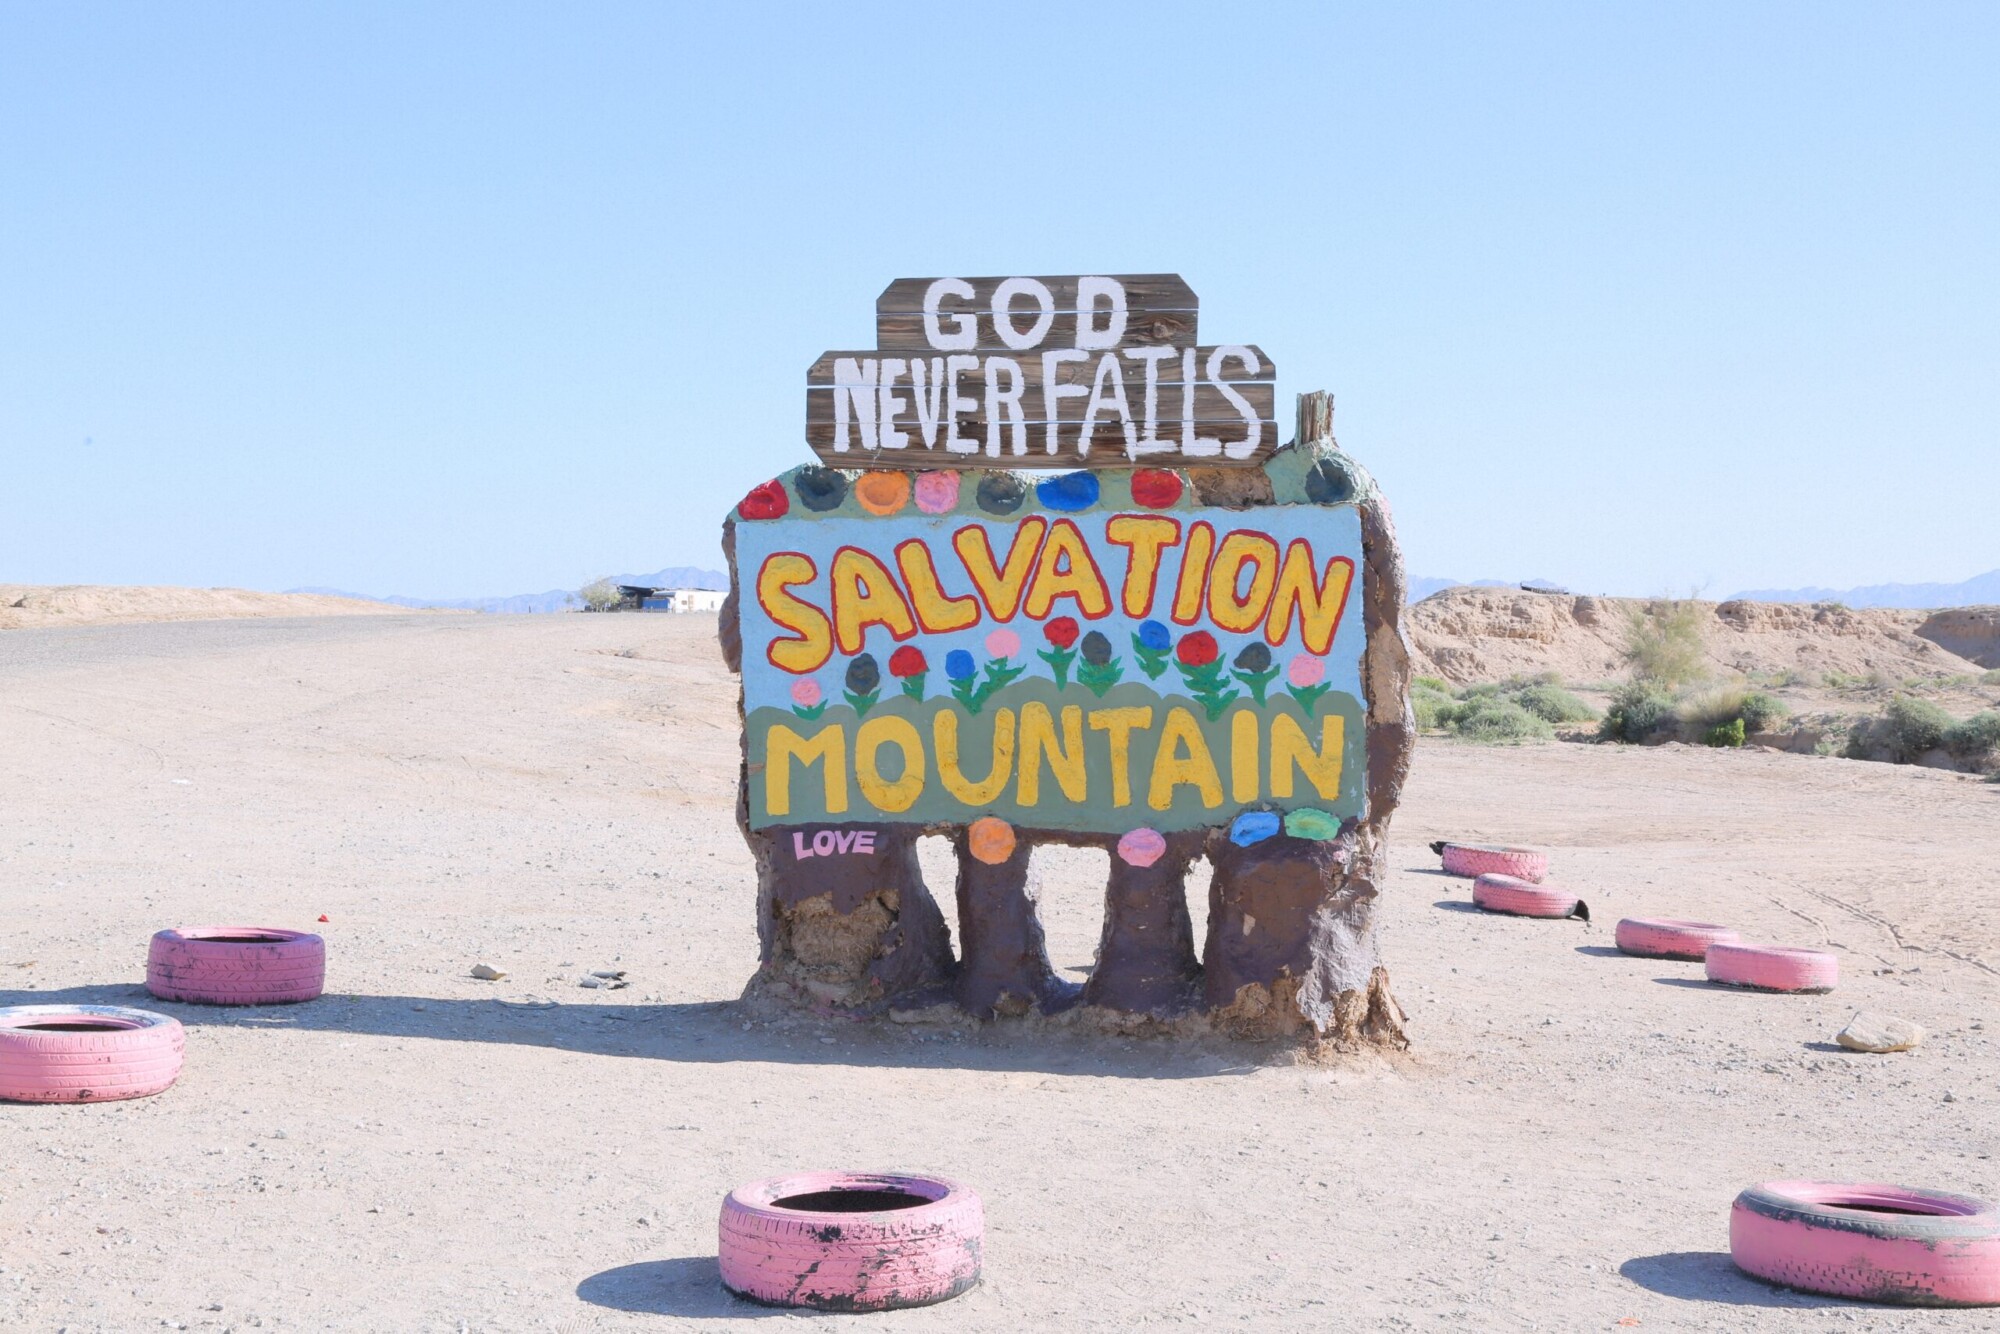 A hand painted sign at Salvation Mountain that reads 'God never fails. Salvation Mountian. Love'